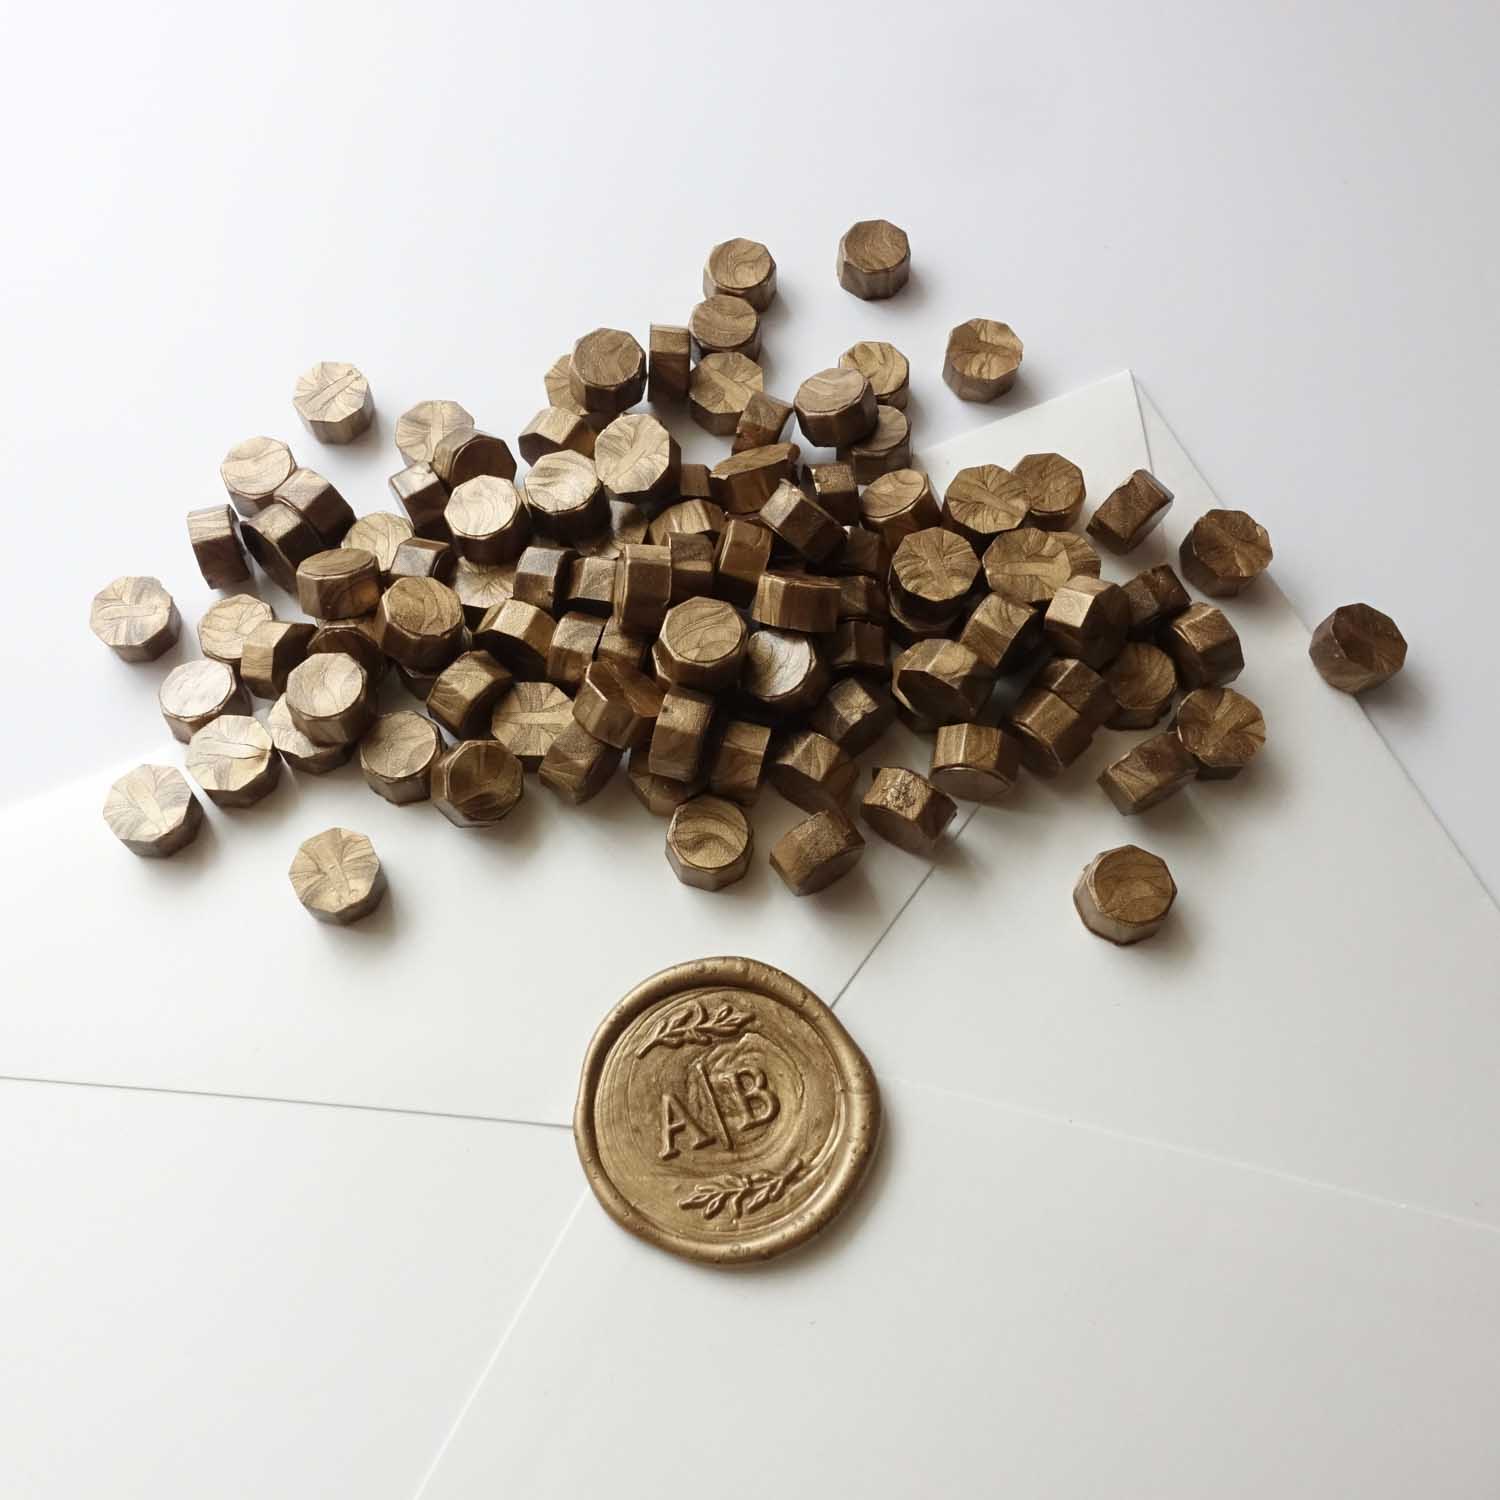 Bronze gold wax beads pellets granules with monogram initials wax seal on white envelope